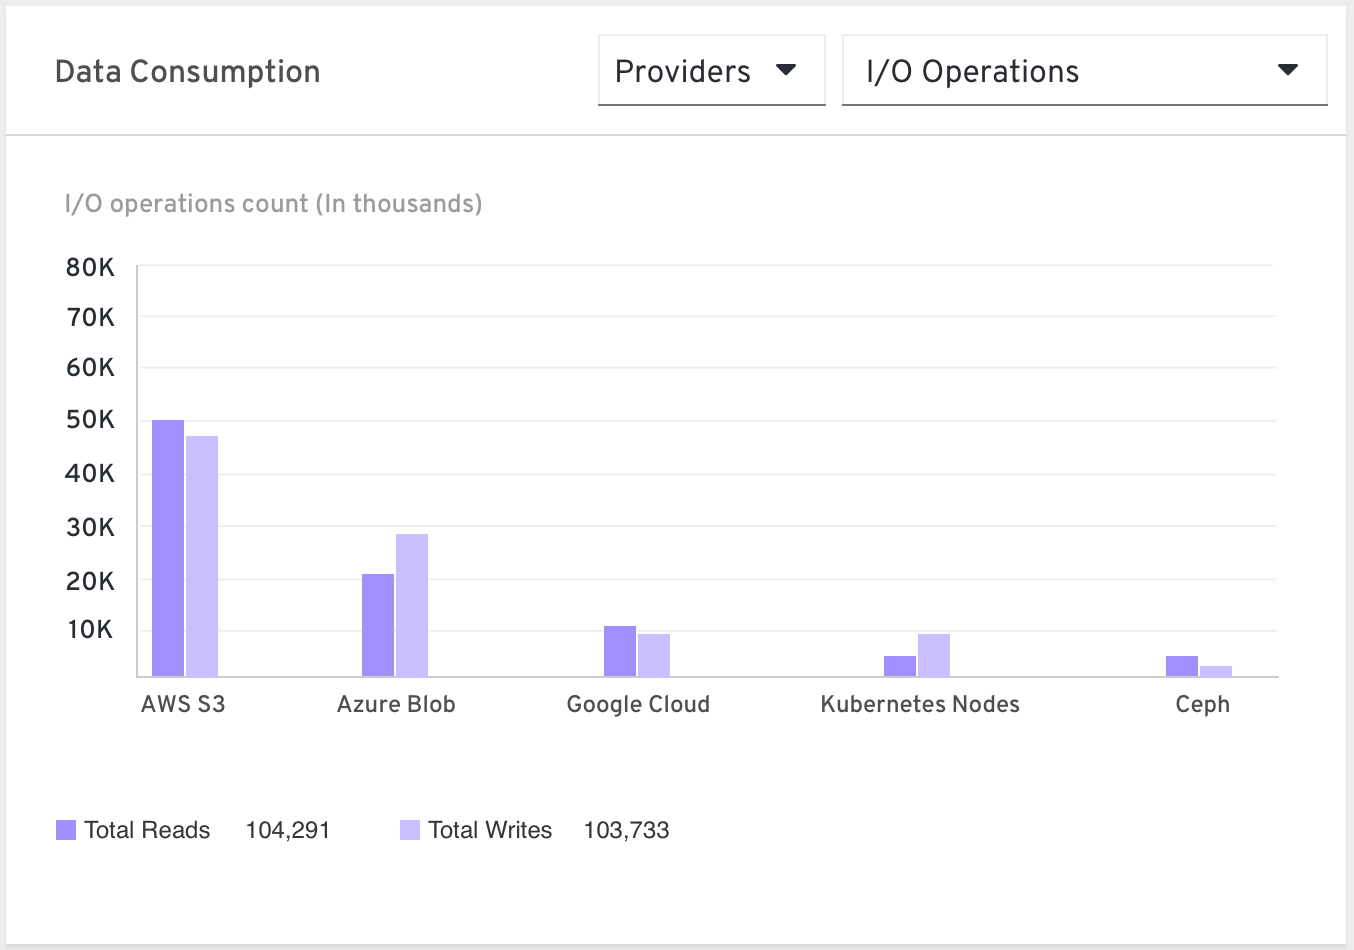 Providers by I/O operations